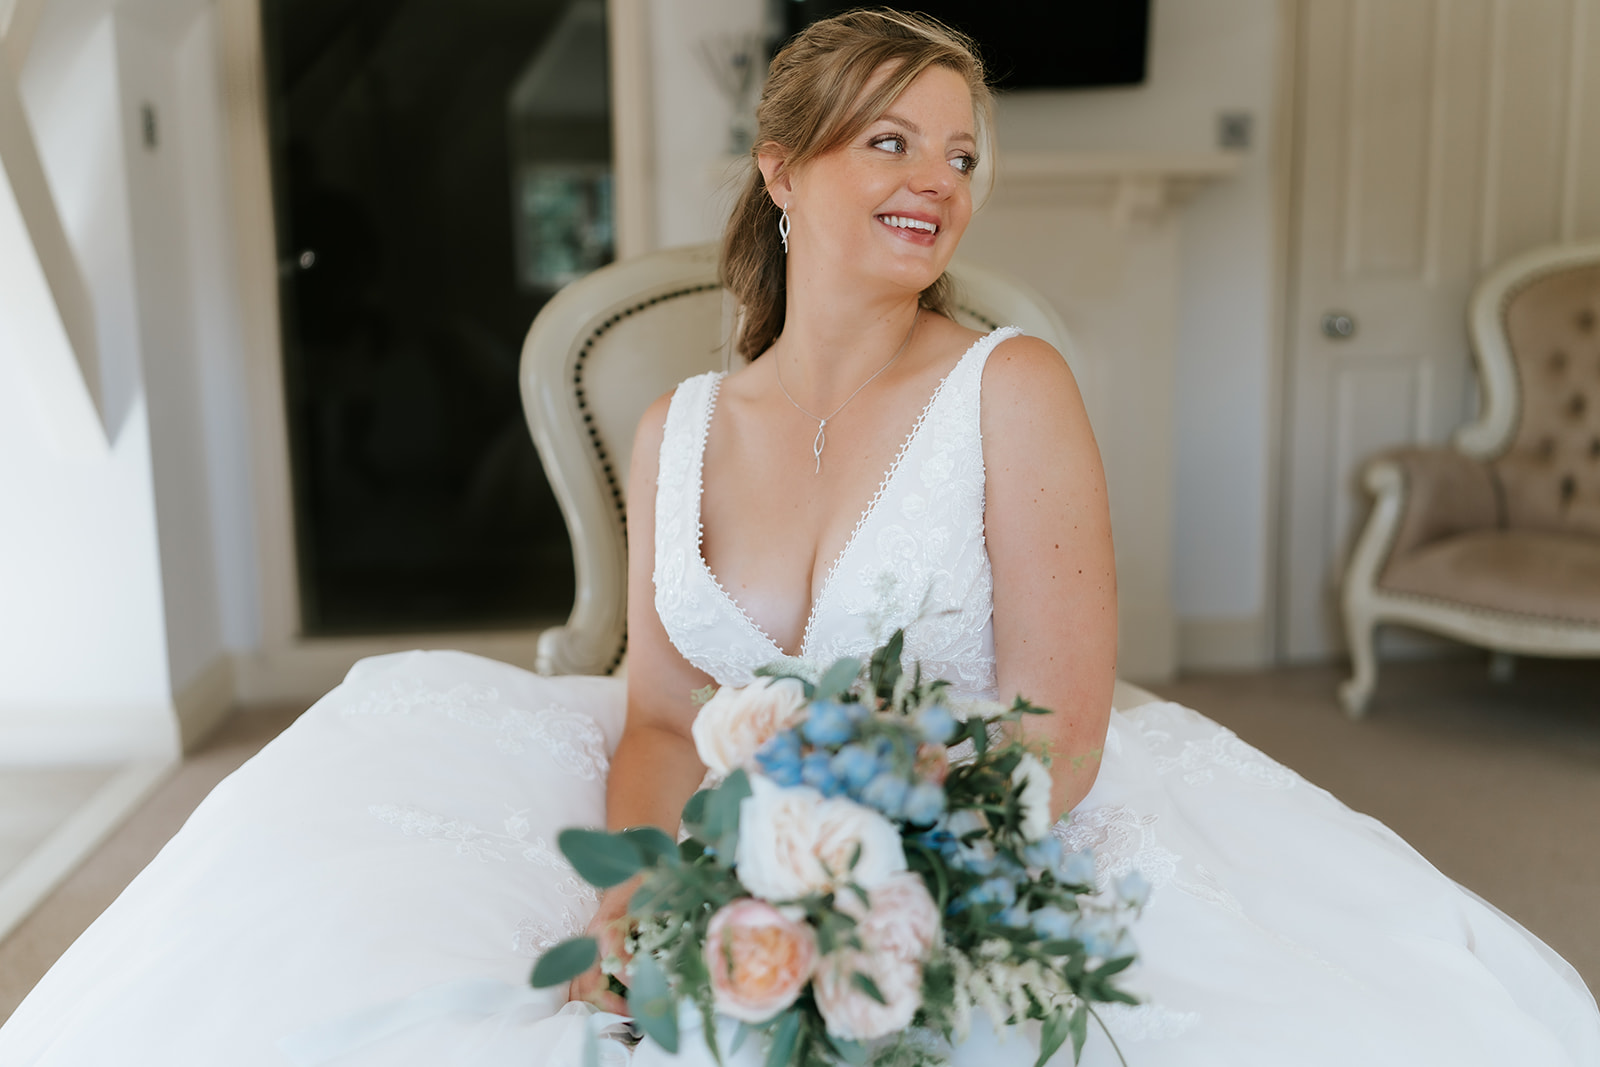 Bride ready to get married at Woodhall Manor wedding venue